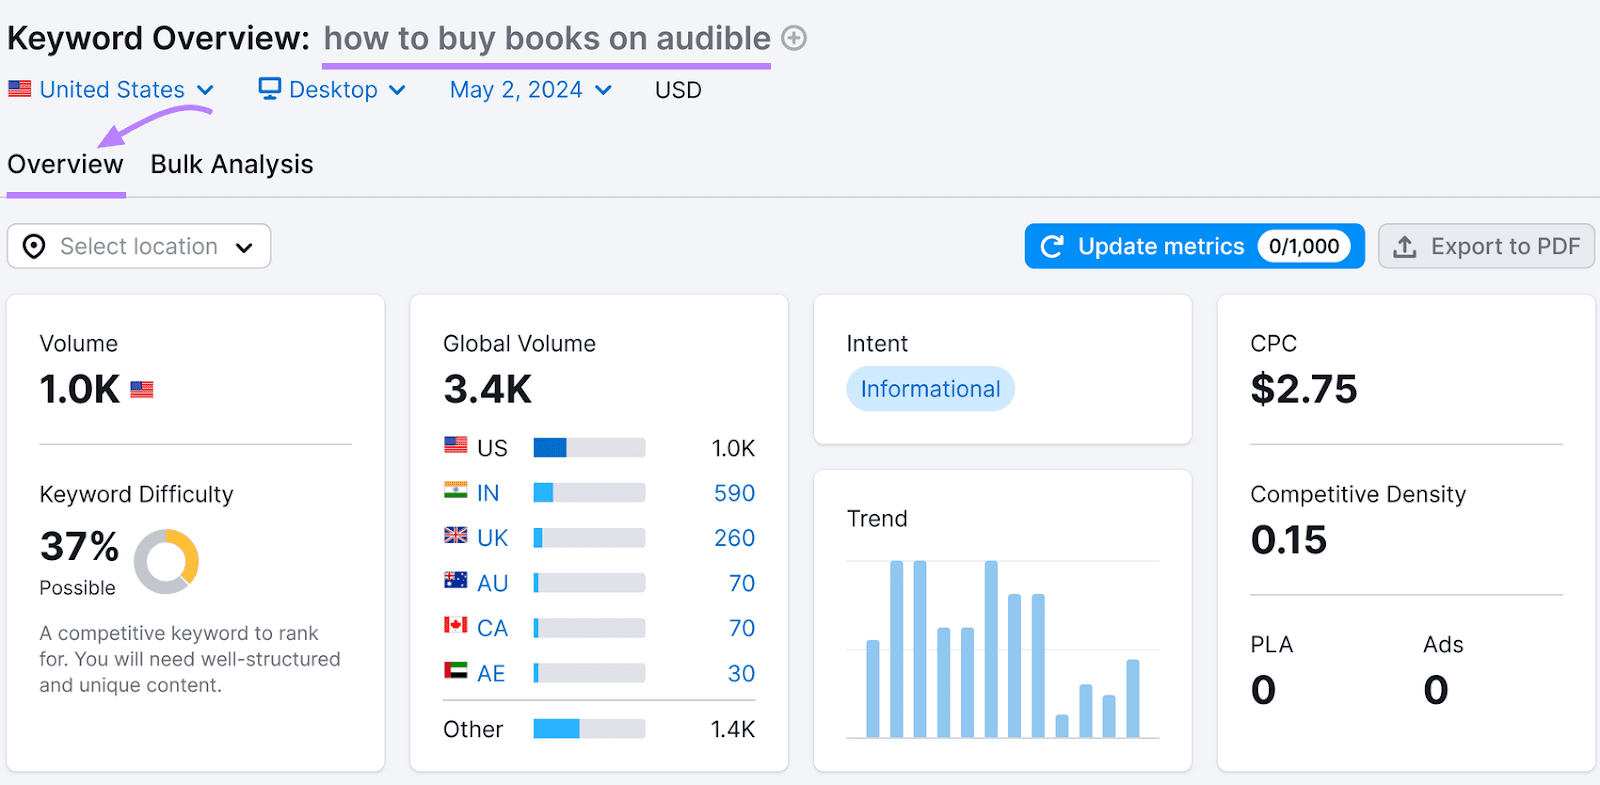 Keyword Overview "Overview" tab with various info for "how to buy books on audible."